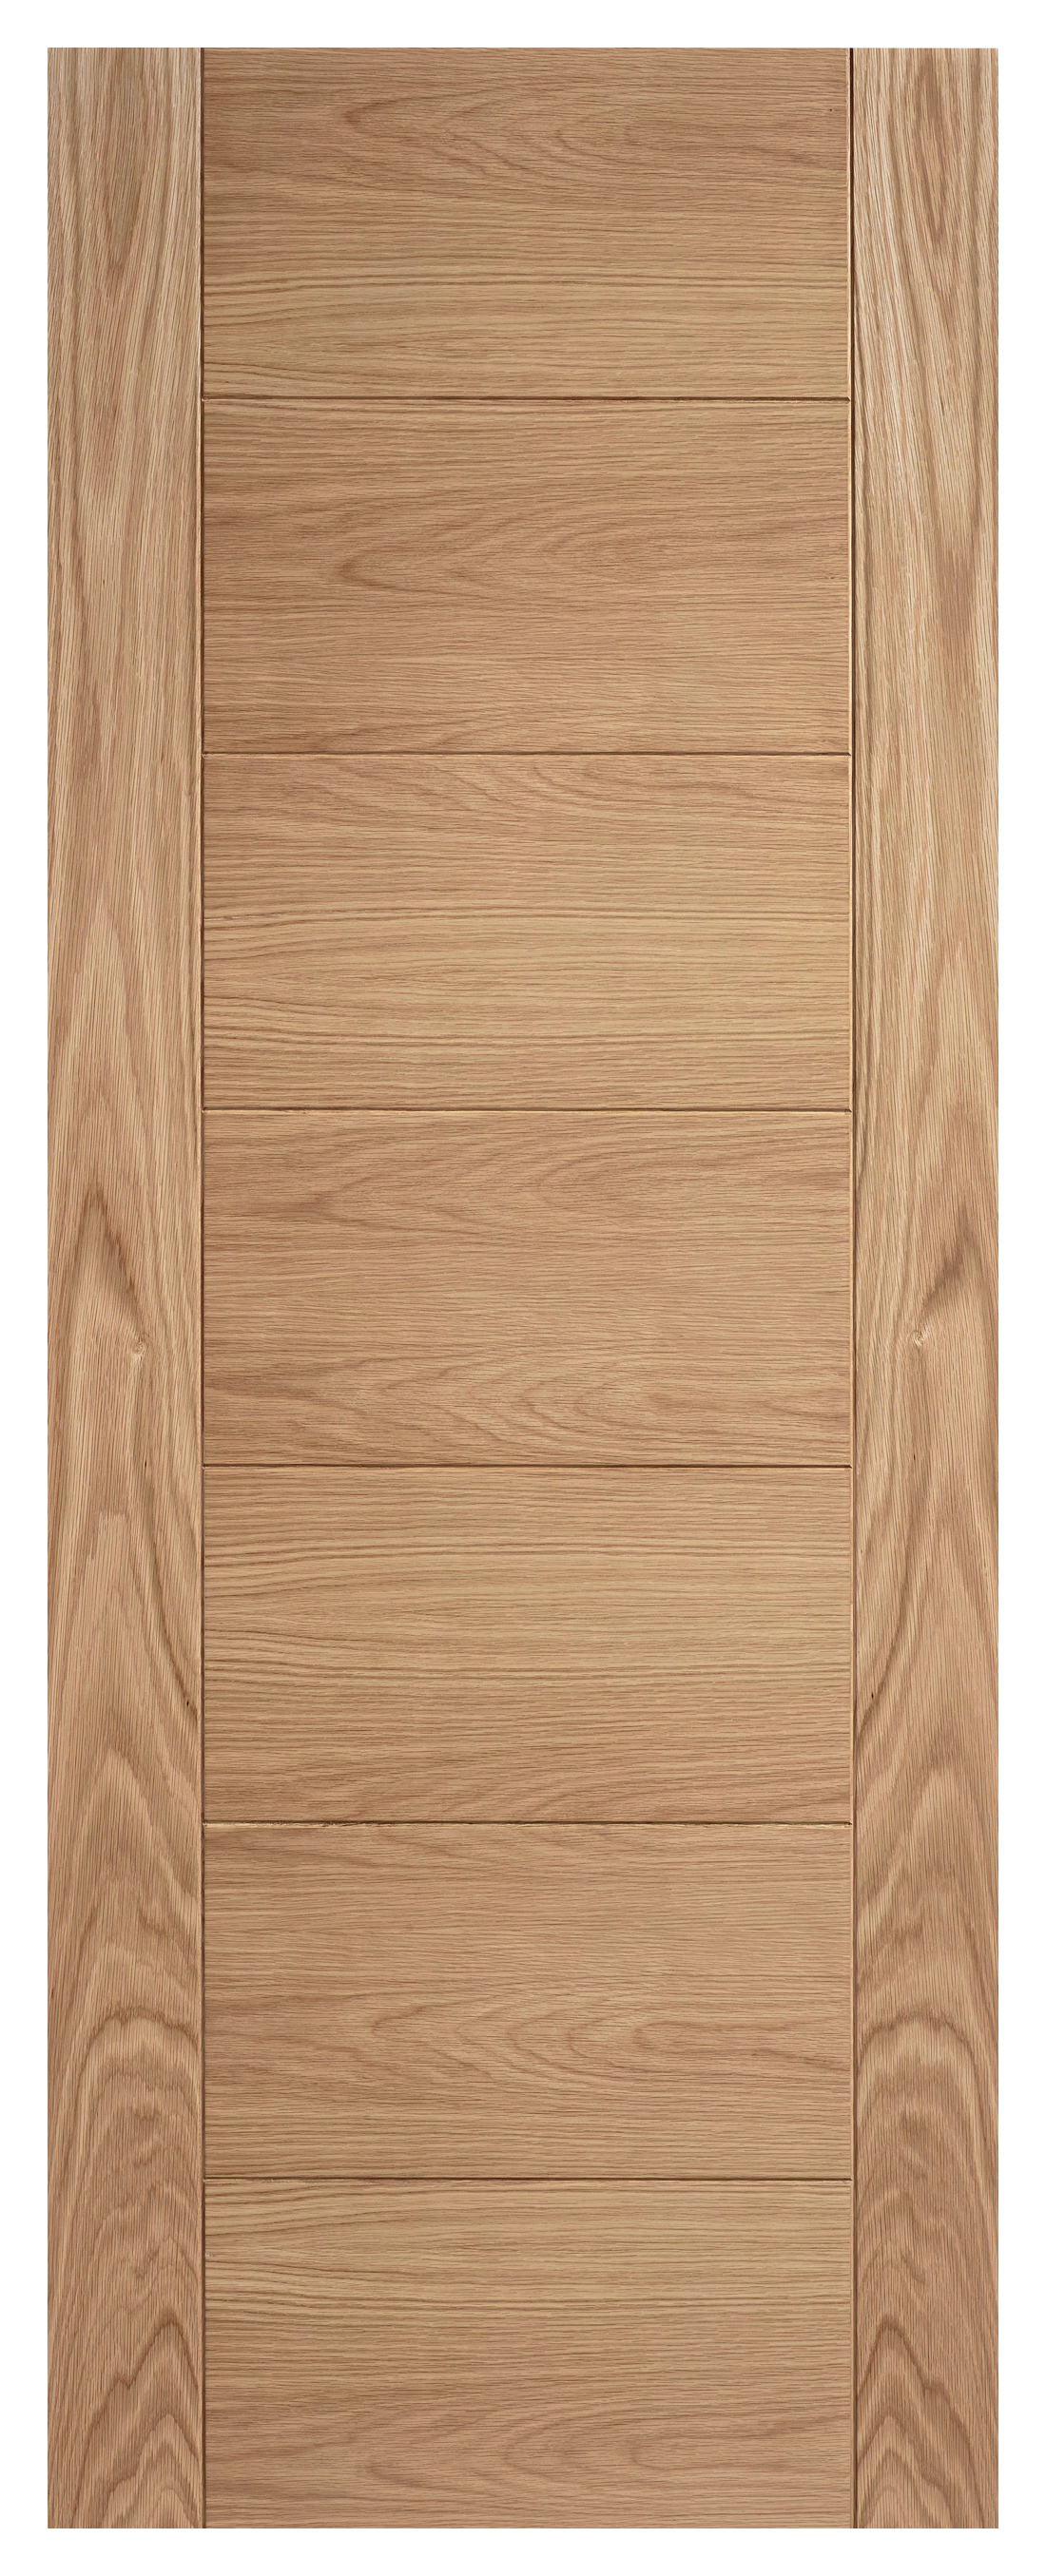 Image of LPD Internal Carini 7 Panel Pre-Finished Oak Solid Core Door - 726 x 2040mm